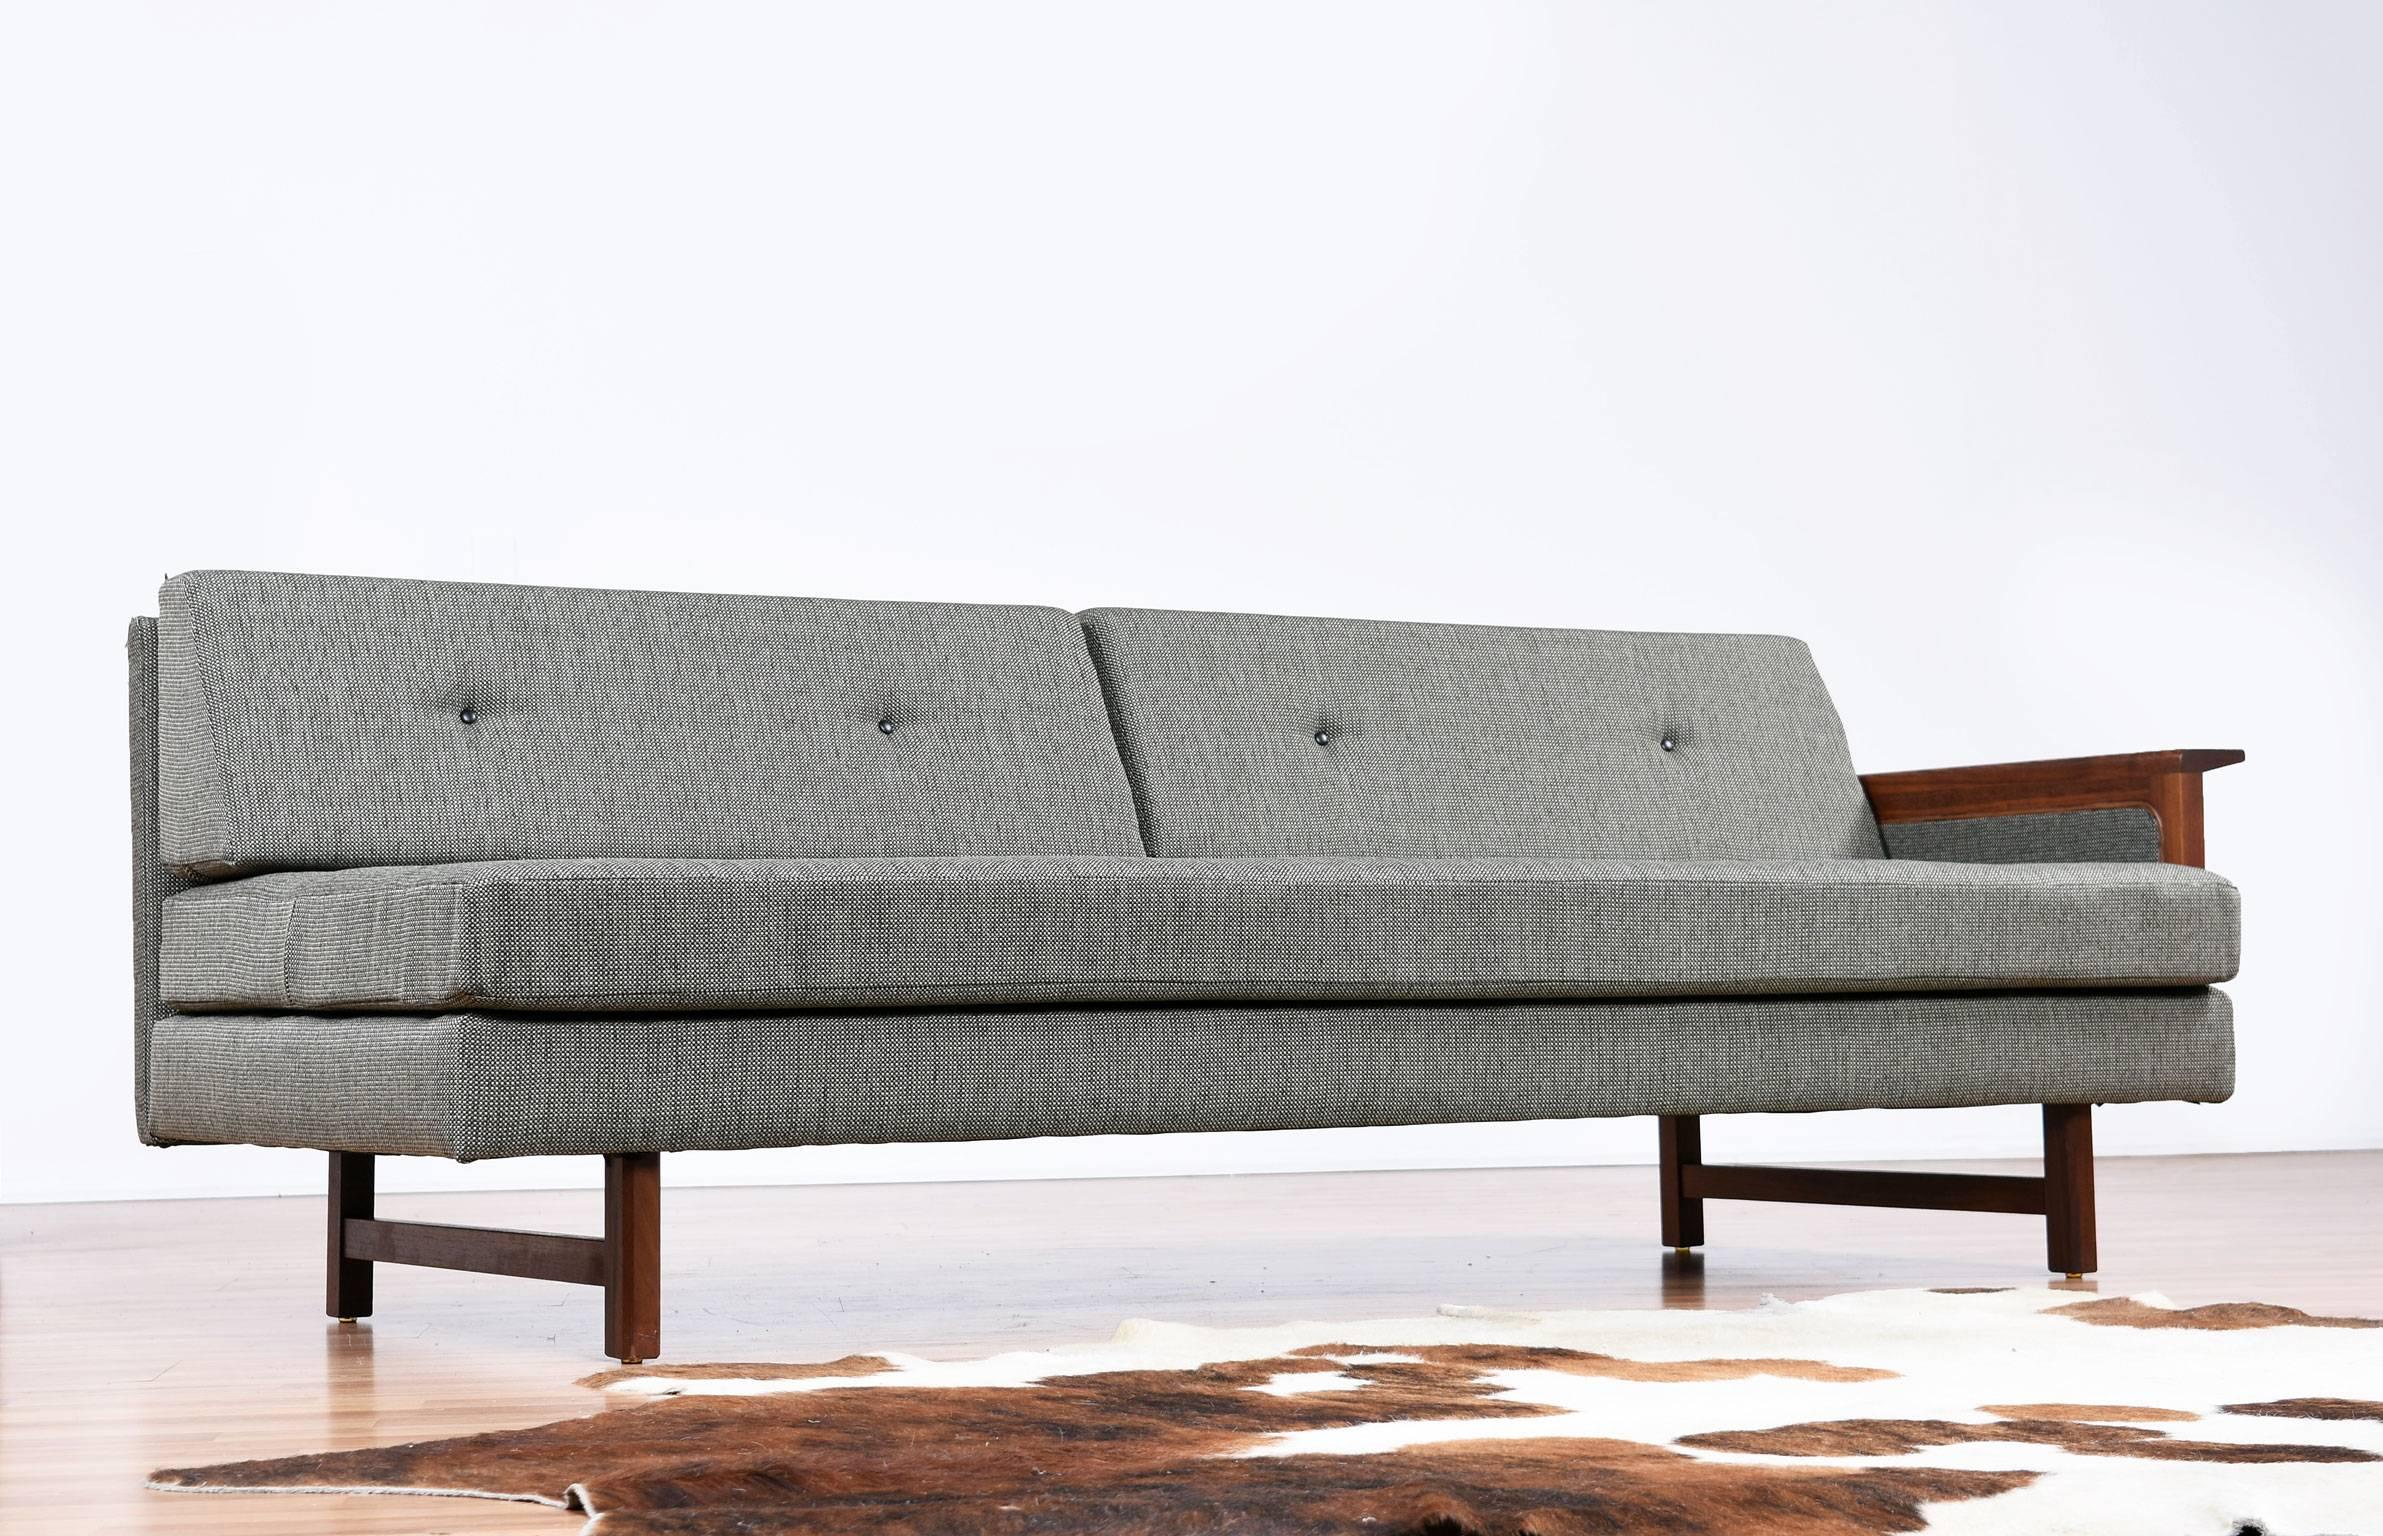 Restored Mid-Century Modern one armed sofa. This sofa has got the full treatment with new cushions, fabric and refinished walnut wood. It’s practically like having a brand new vintage sofa. The fabric is a blend of olive green, beige and black and